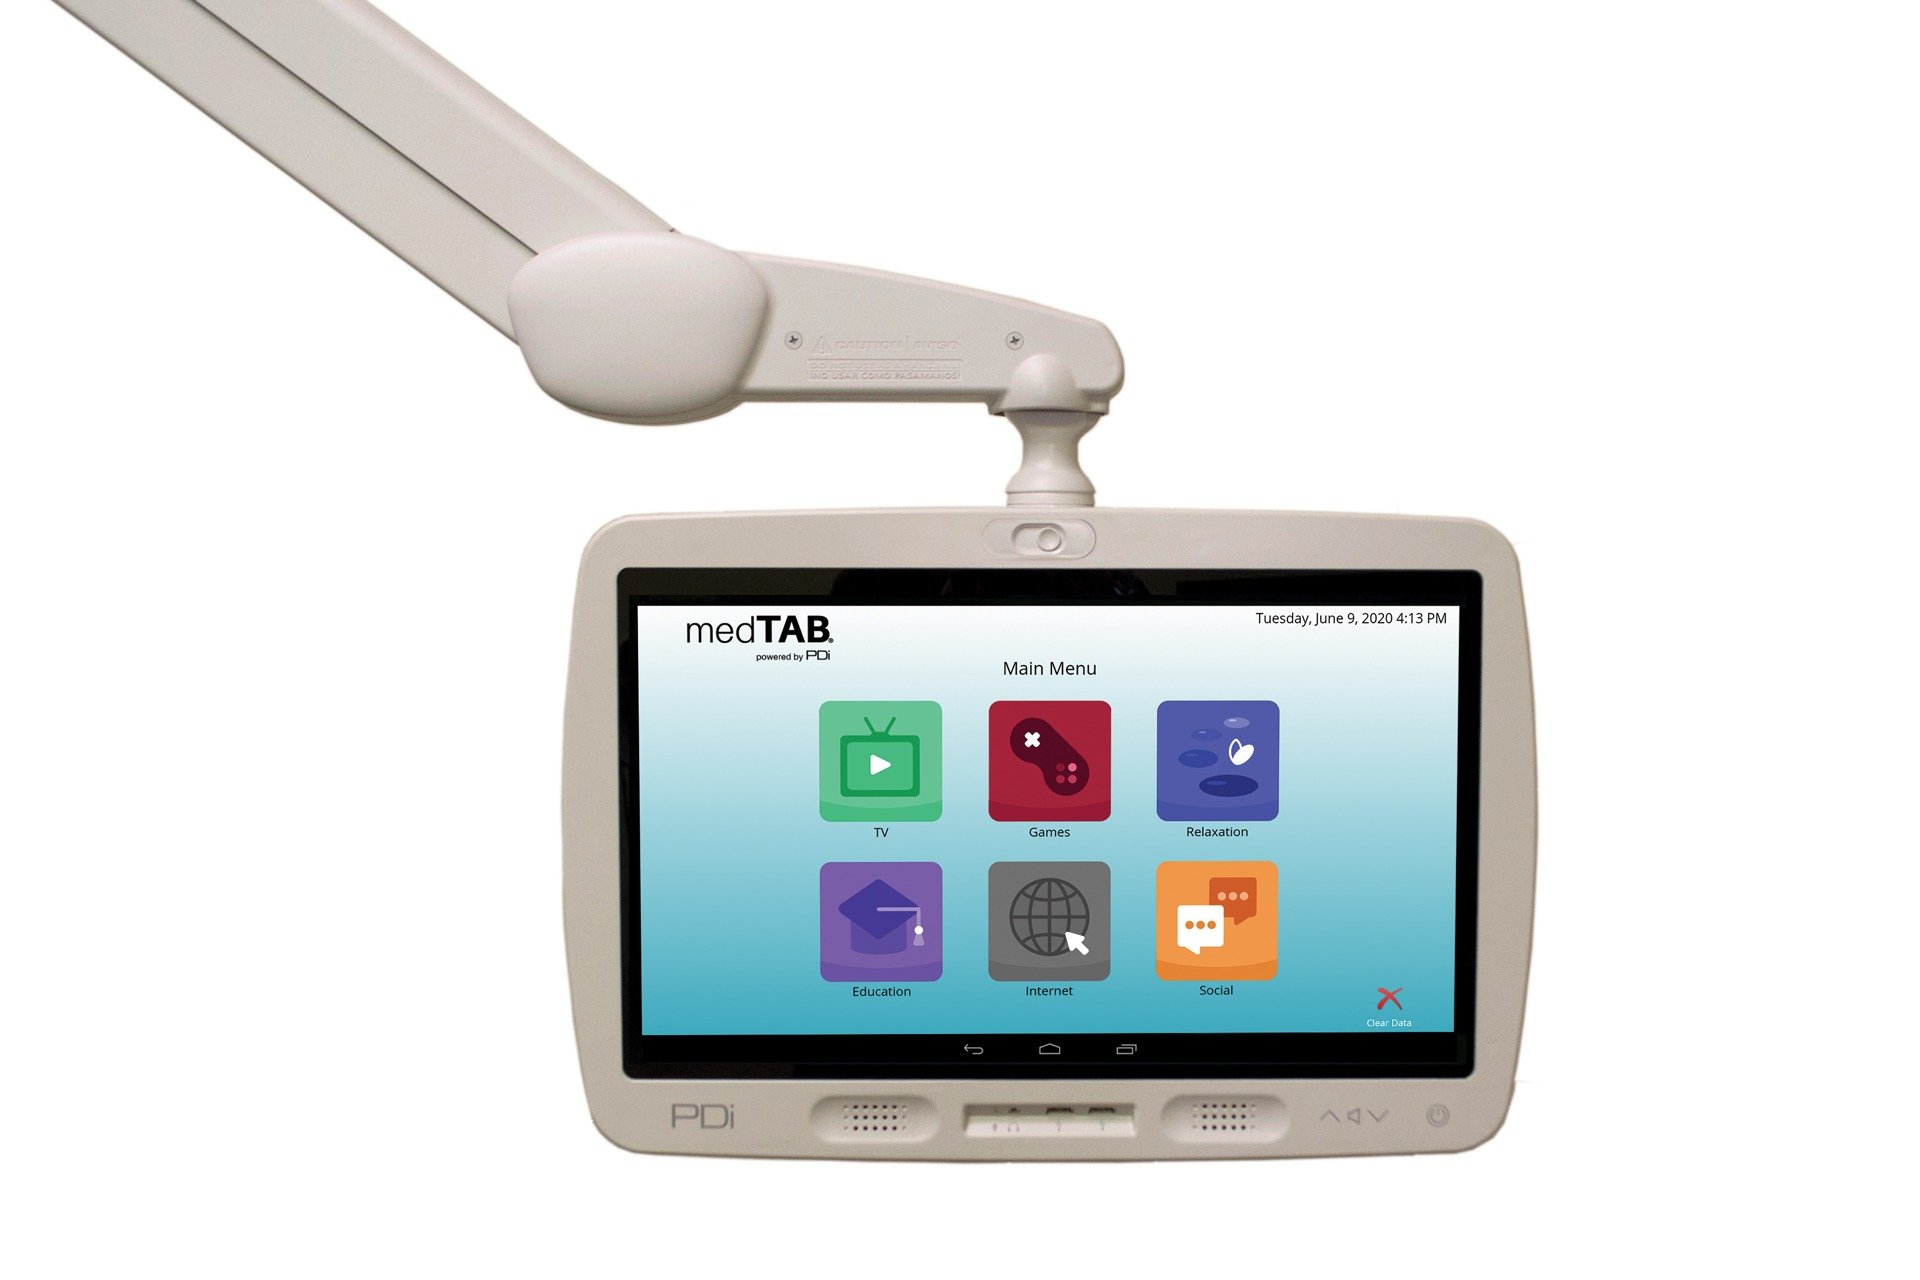 Product image of the medTAB19 healthcare television built by PDi Communication Systems, Inc. with six icons and internet